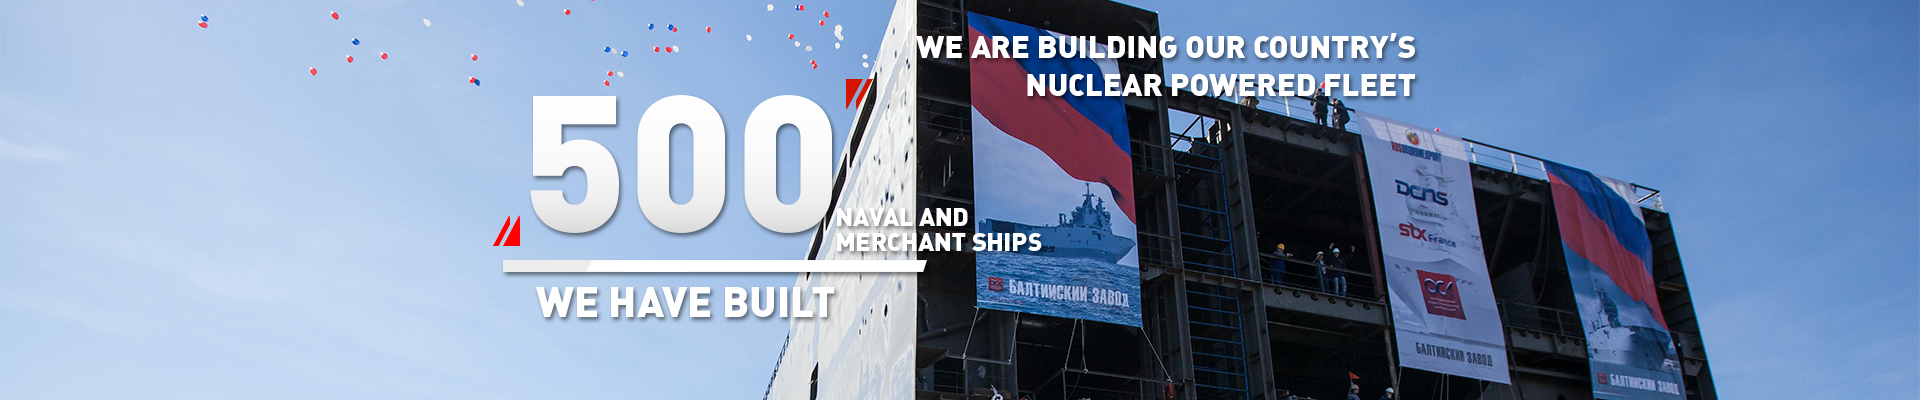 500 naval and merchant ships we have built